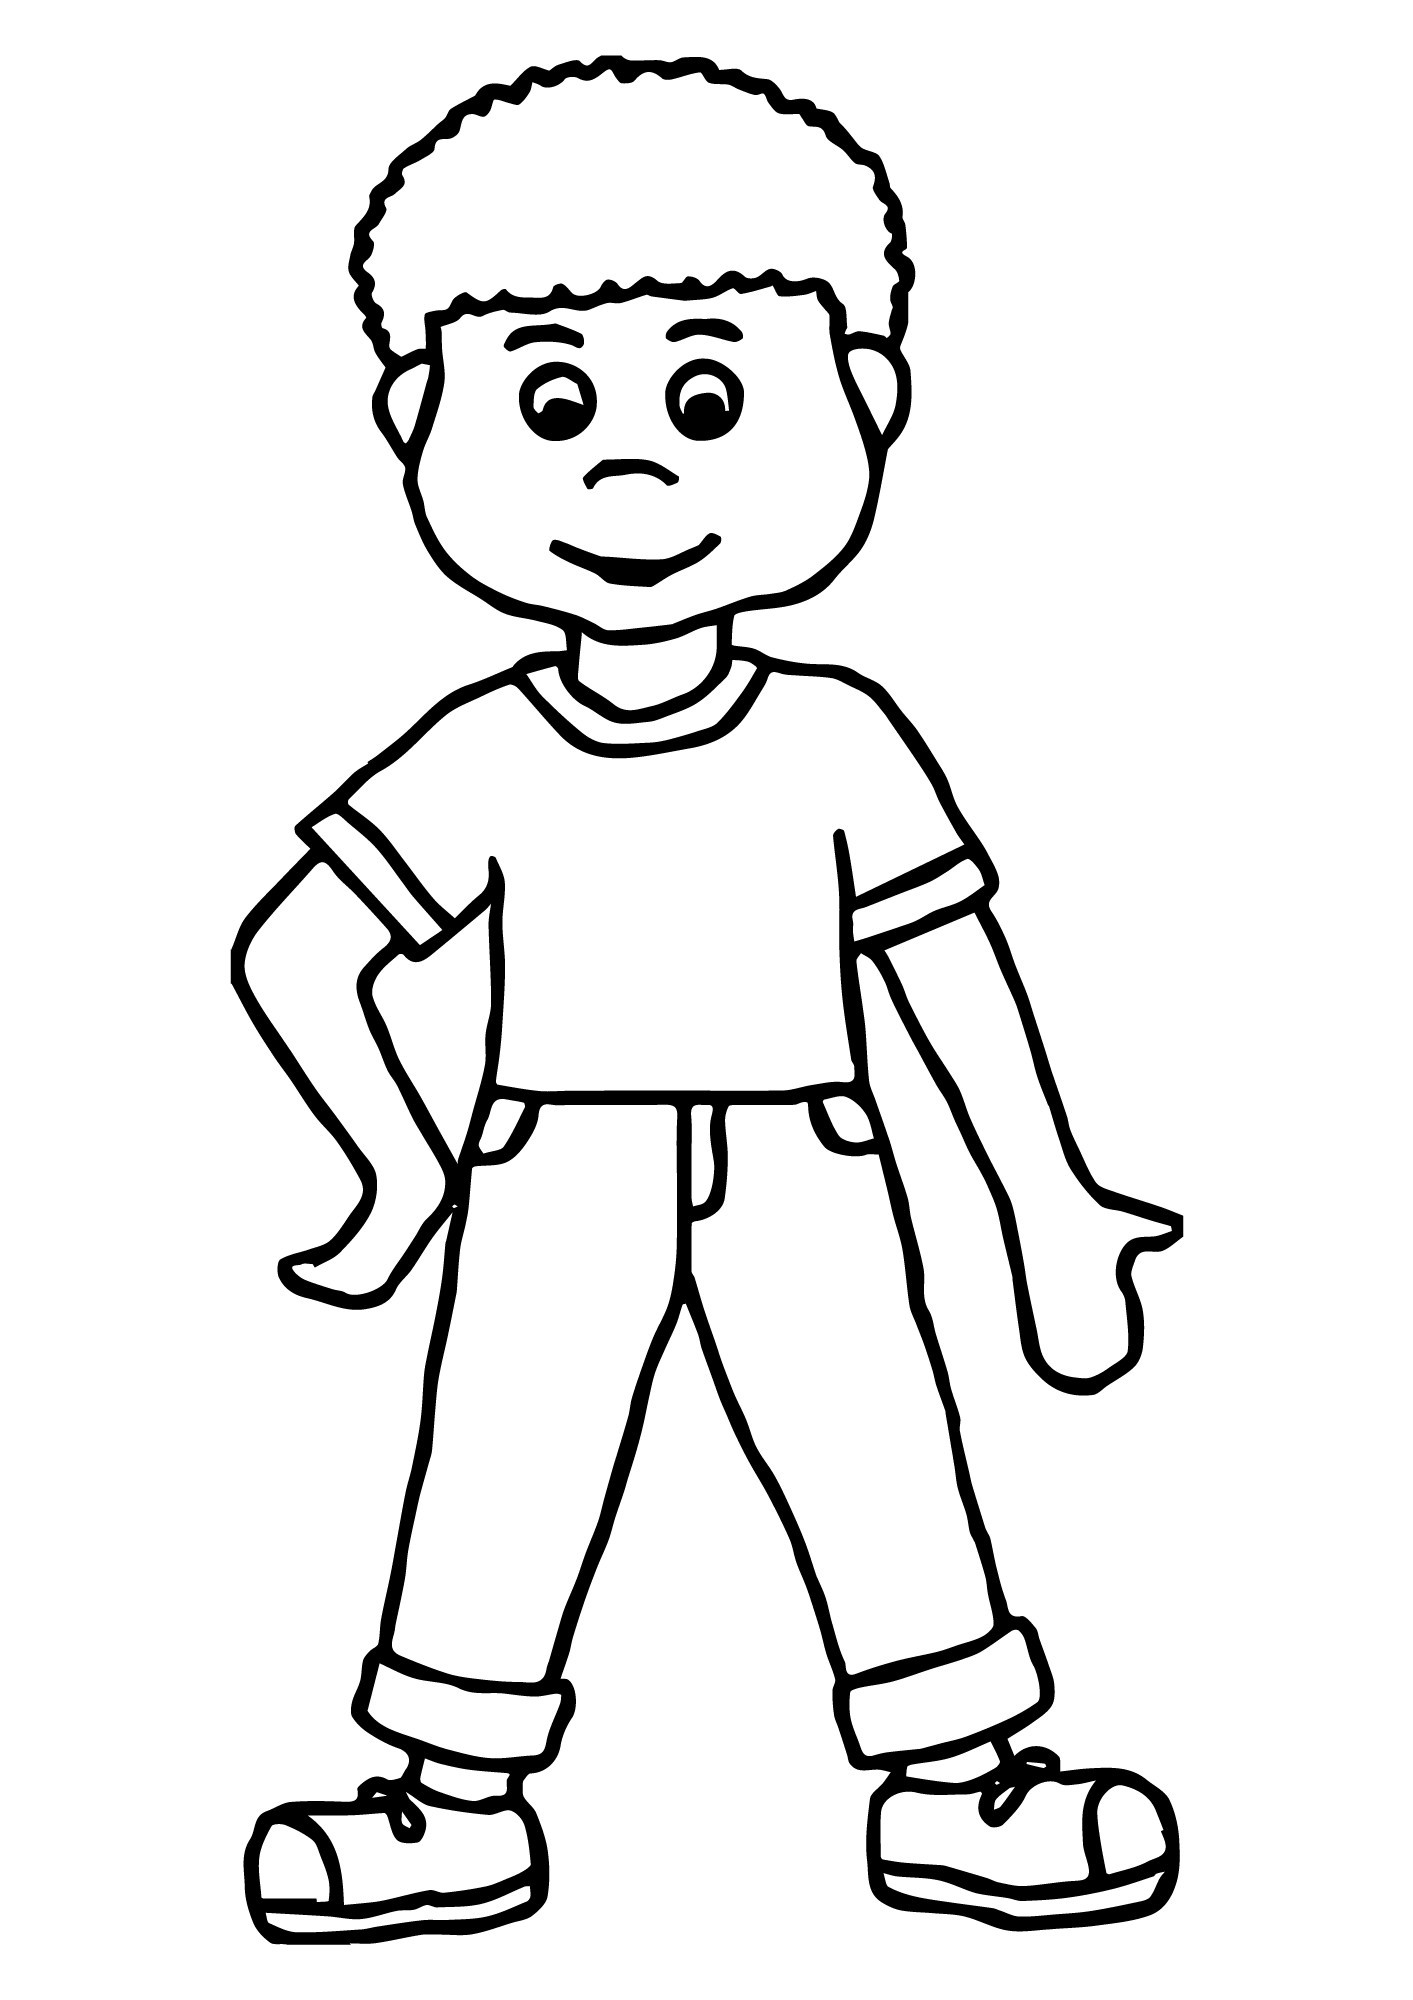 Coloring Pages With Details Boys
 Boy Coloring Page